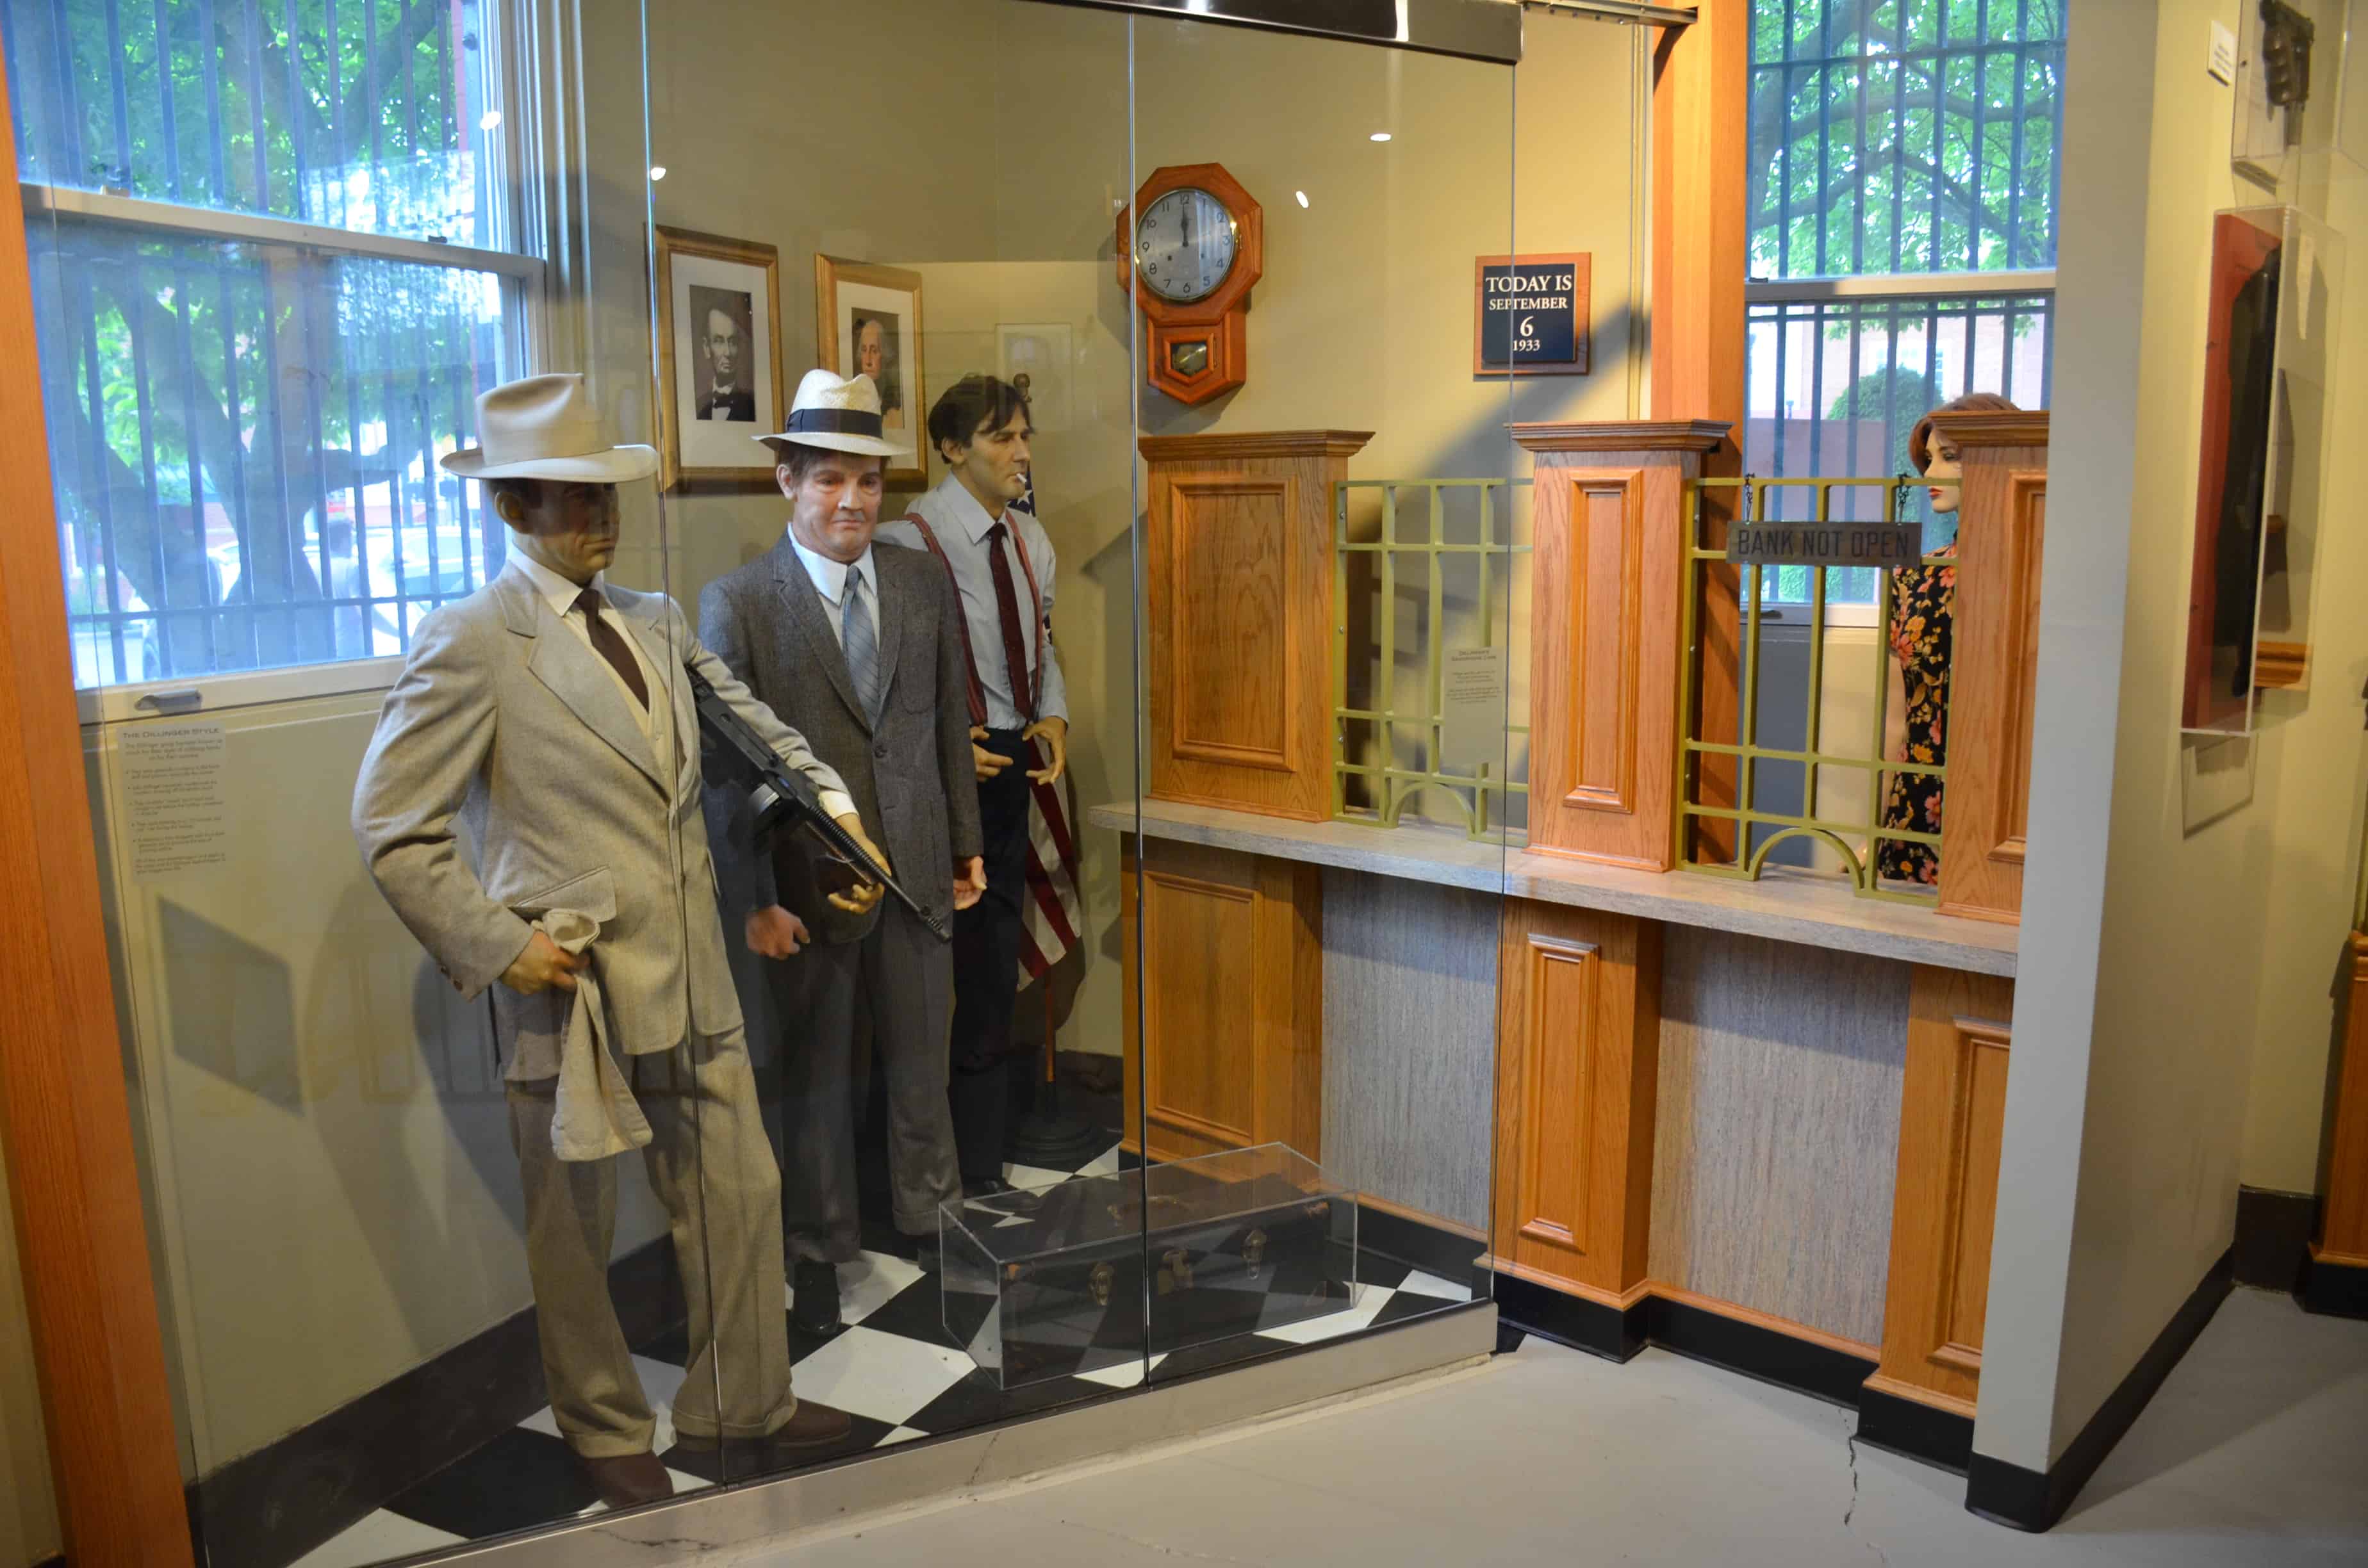 Bank robbers at the John Dillinger Museum in Crown Point, Indiana